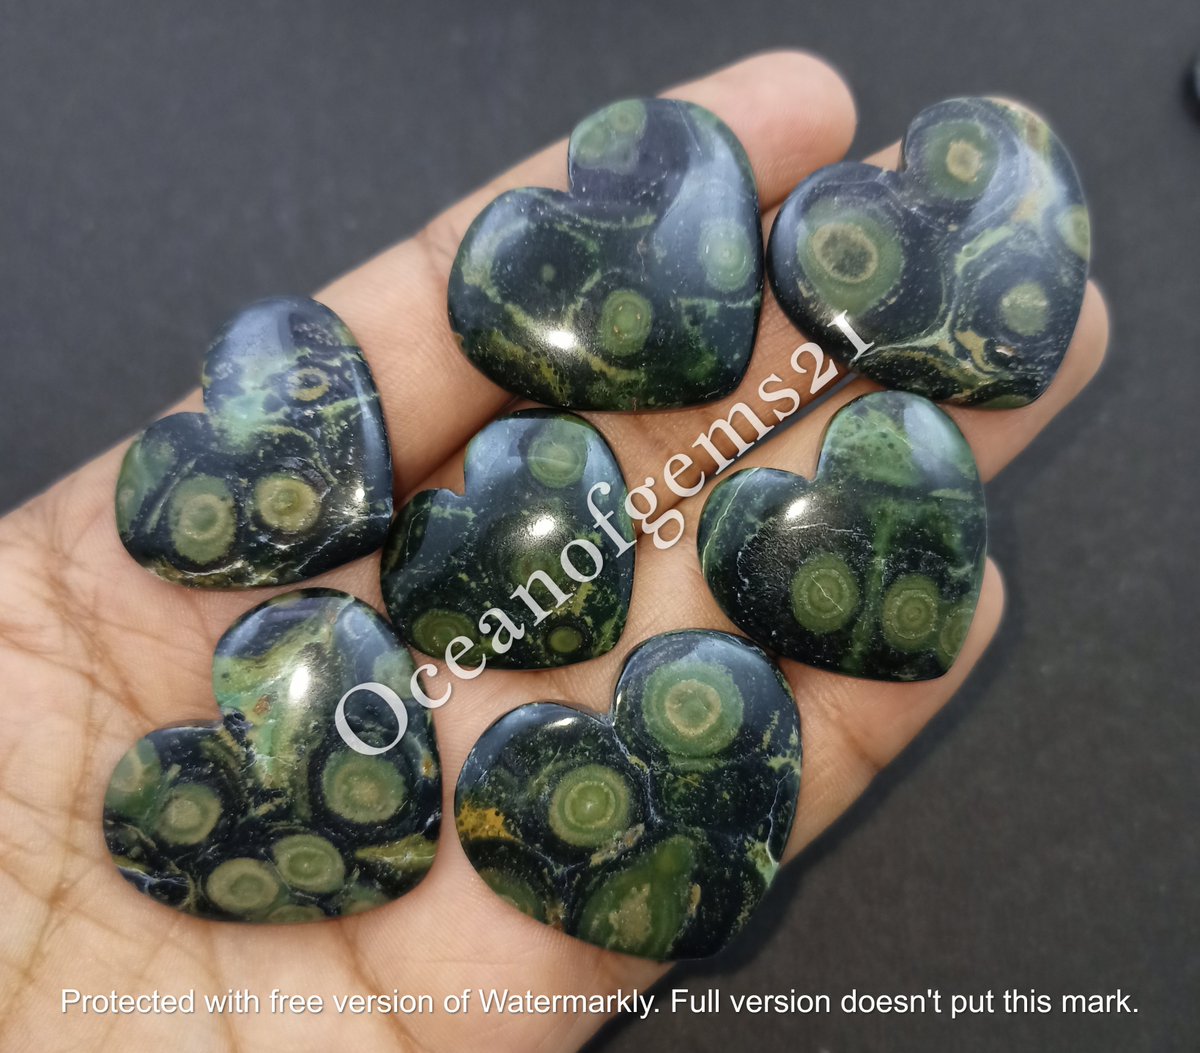 Natural Kambaba Jasper Heart Shape Gemstone Cabochon Dm For Price Size 25 to 35mm Approx Free Drilling Service Worldwide Shipping$6 Combined Shipping Available #kambabajasper #kambabajasperheart #kambabajasperstone #Kambabajaspercabochon #kambabajaspergemstone